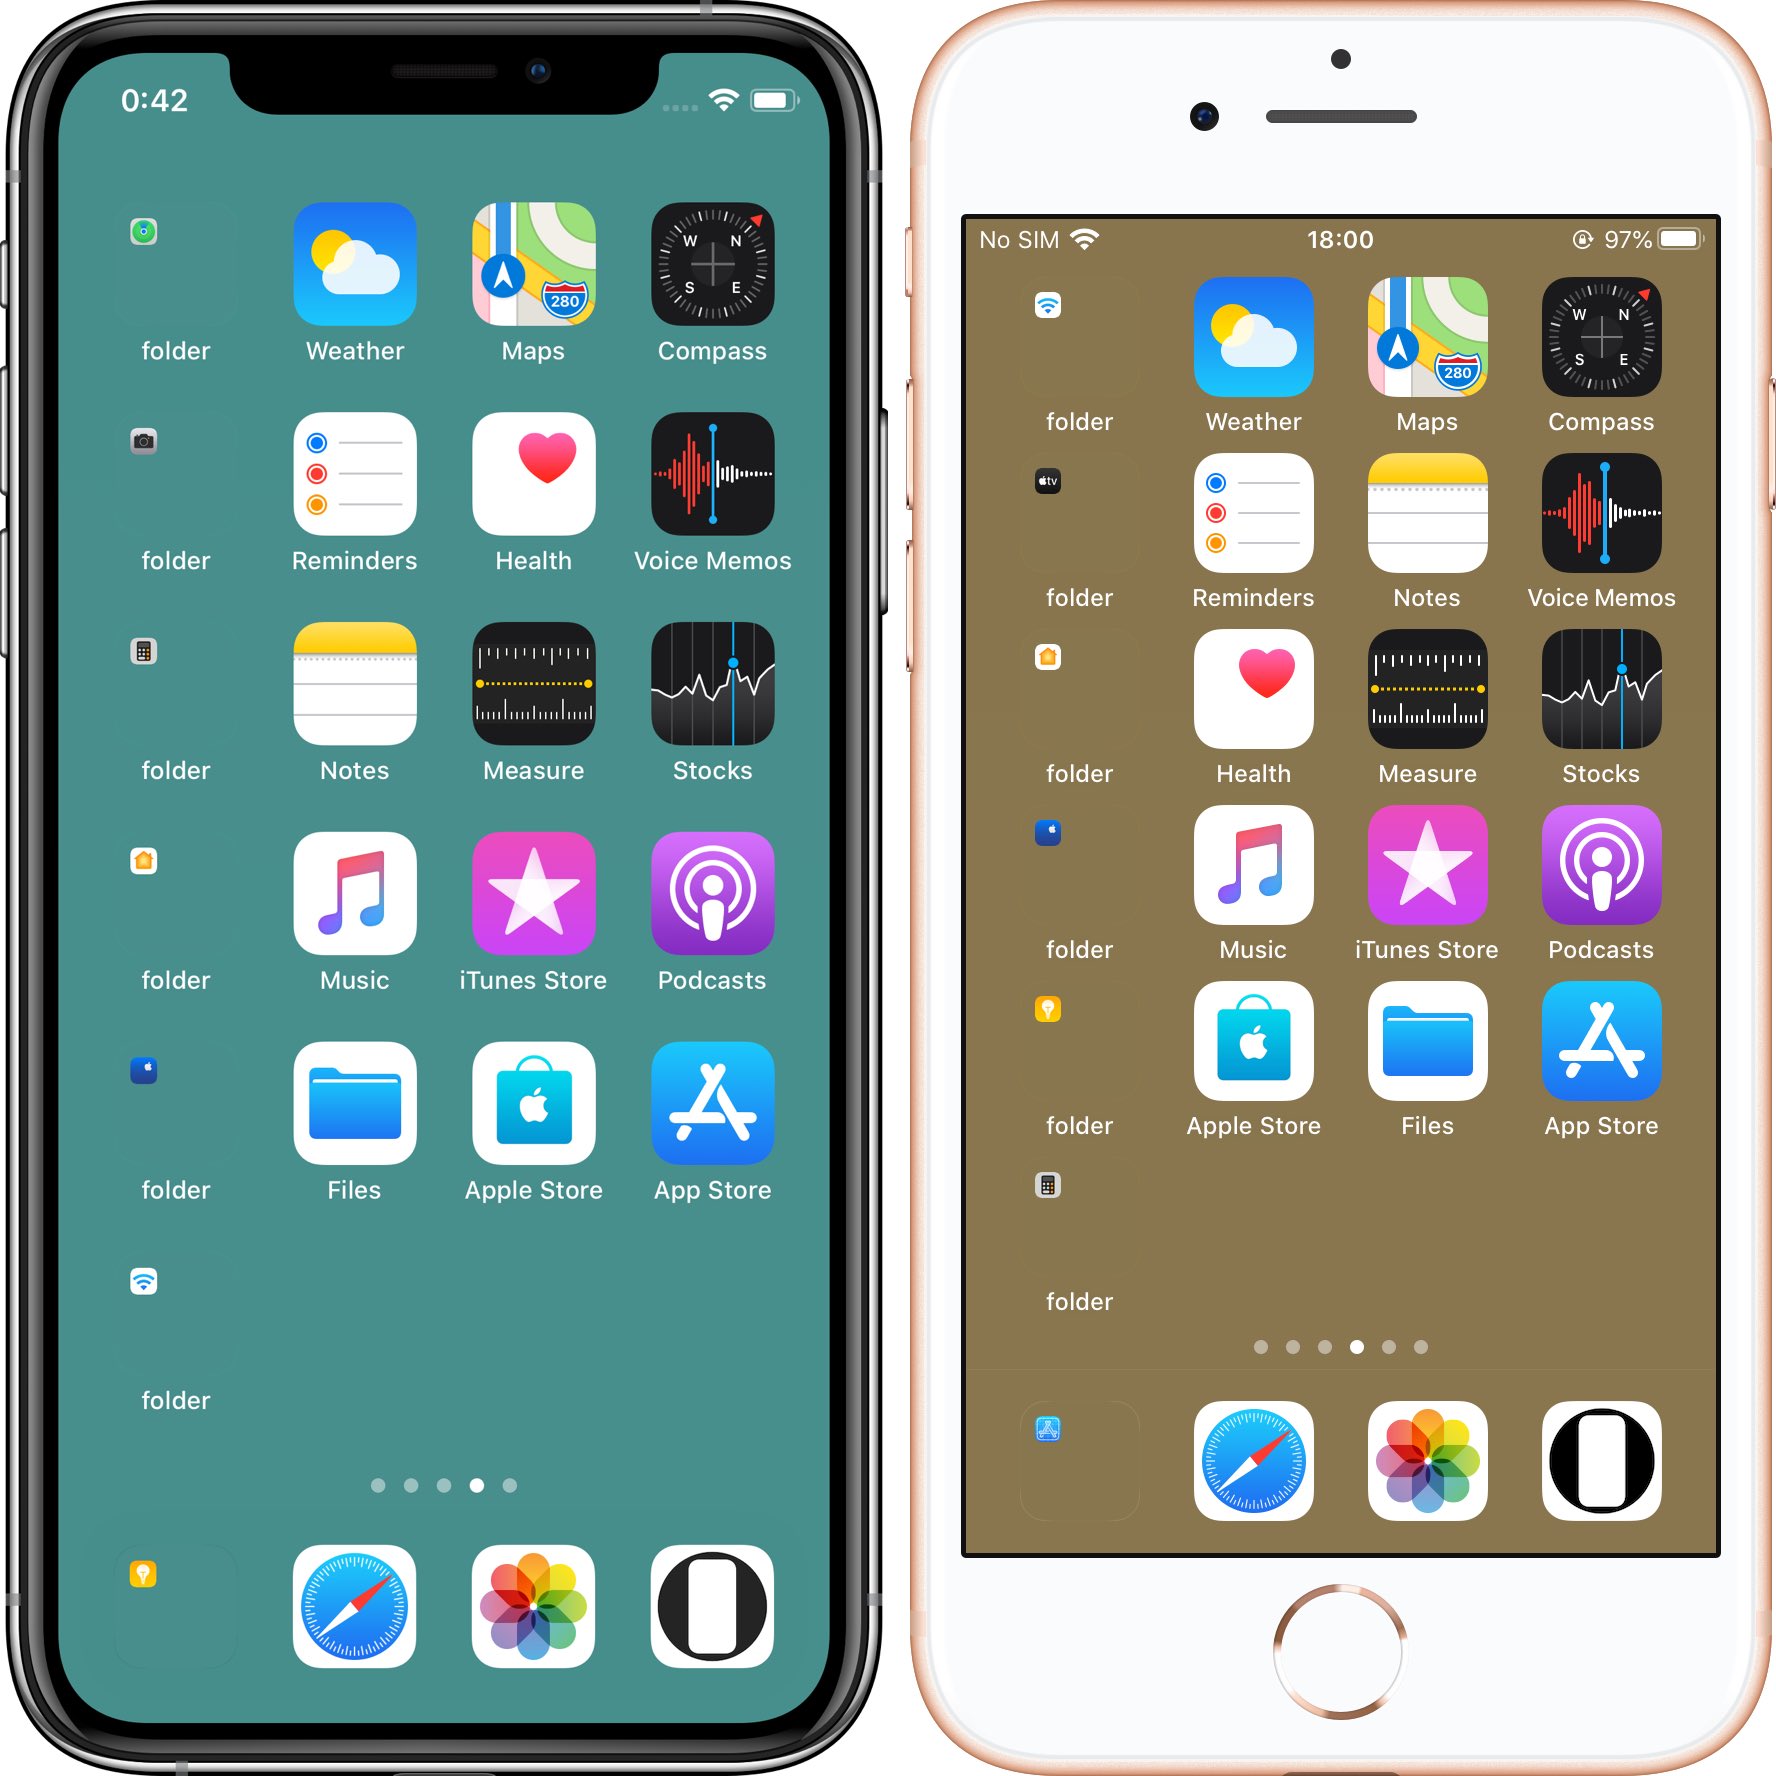 Hide Mysterious Iphone Wallpaper 不思議なiphone壁紙 透明度を下げる でドックとフォルダを隠すシックな色の壁紙 Ios 13 2以降に最適化 12 11枚 Chic Color Wallpapers That Hide Dock And Folders With Reduce Transparency Optimized For Ios